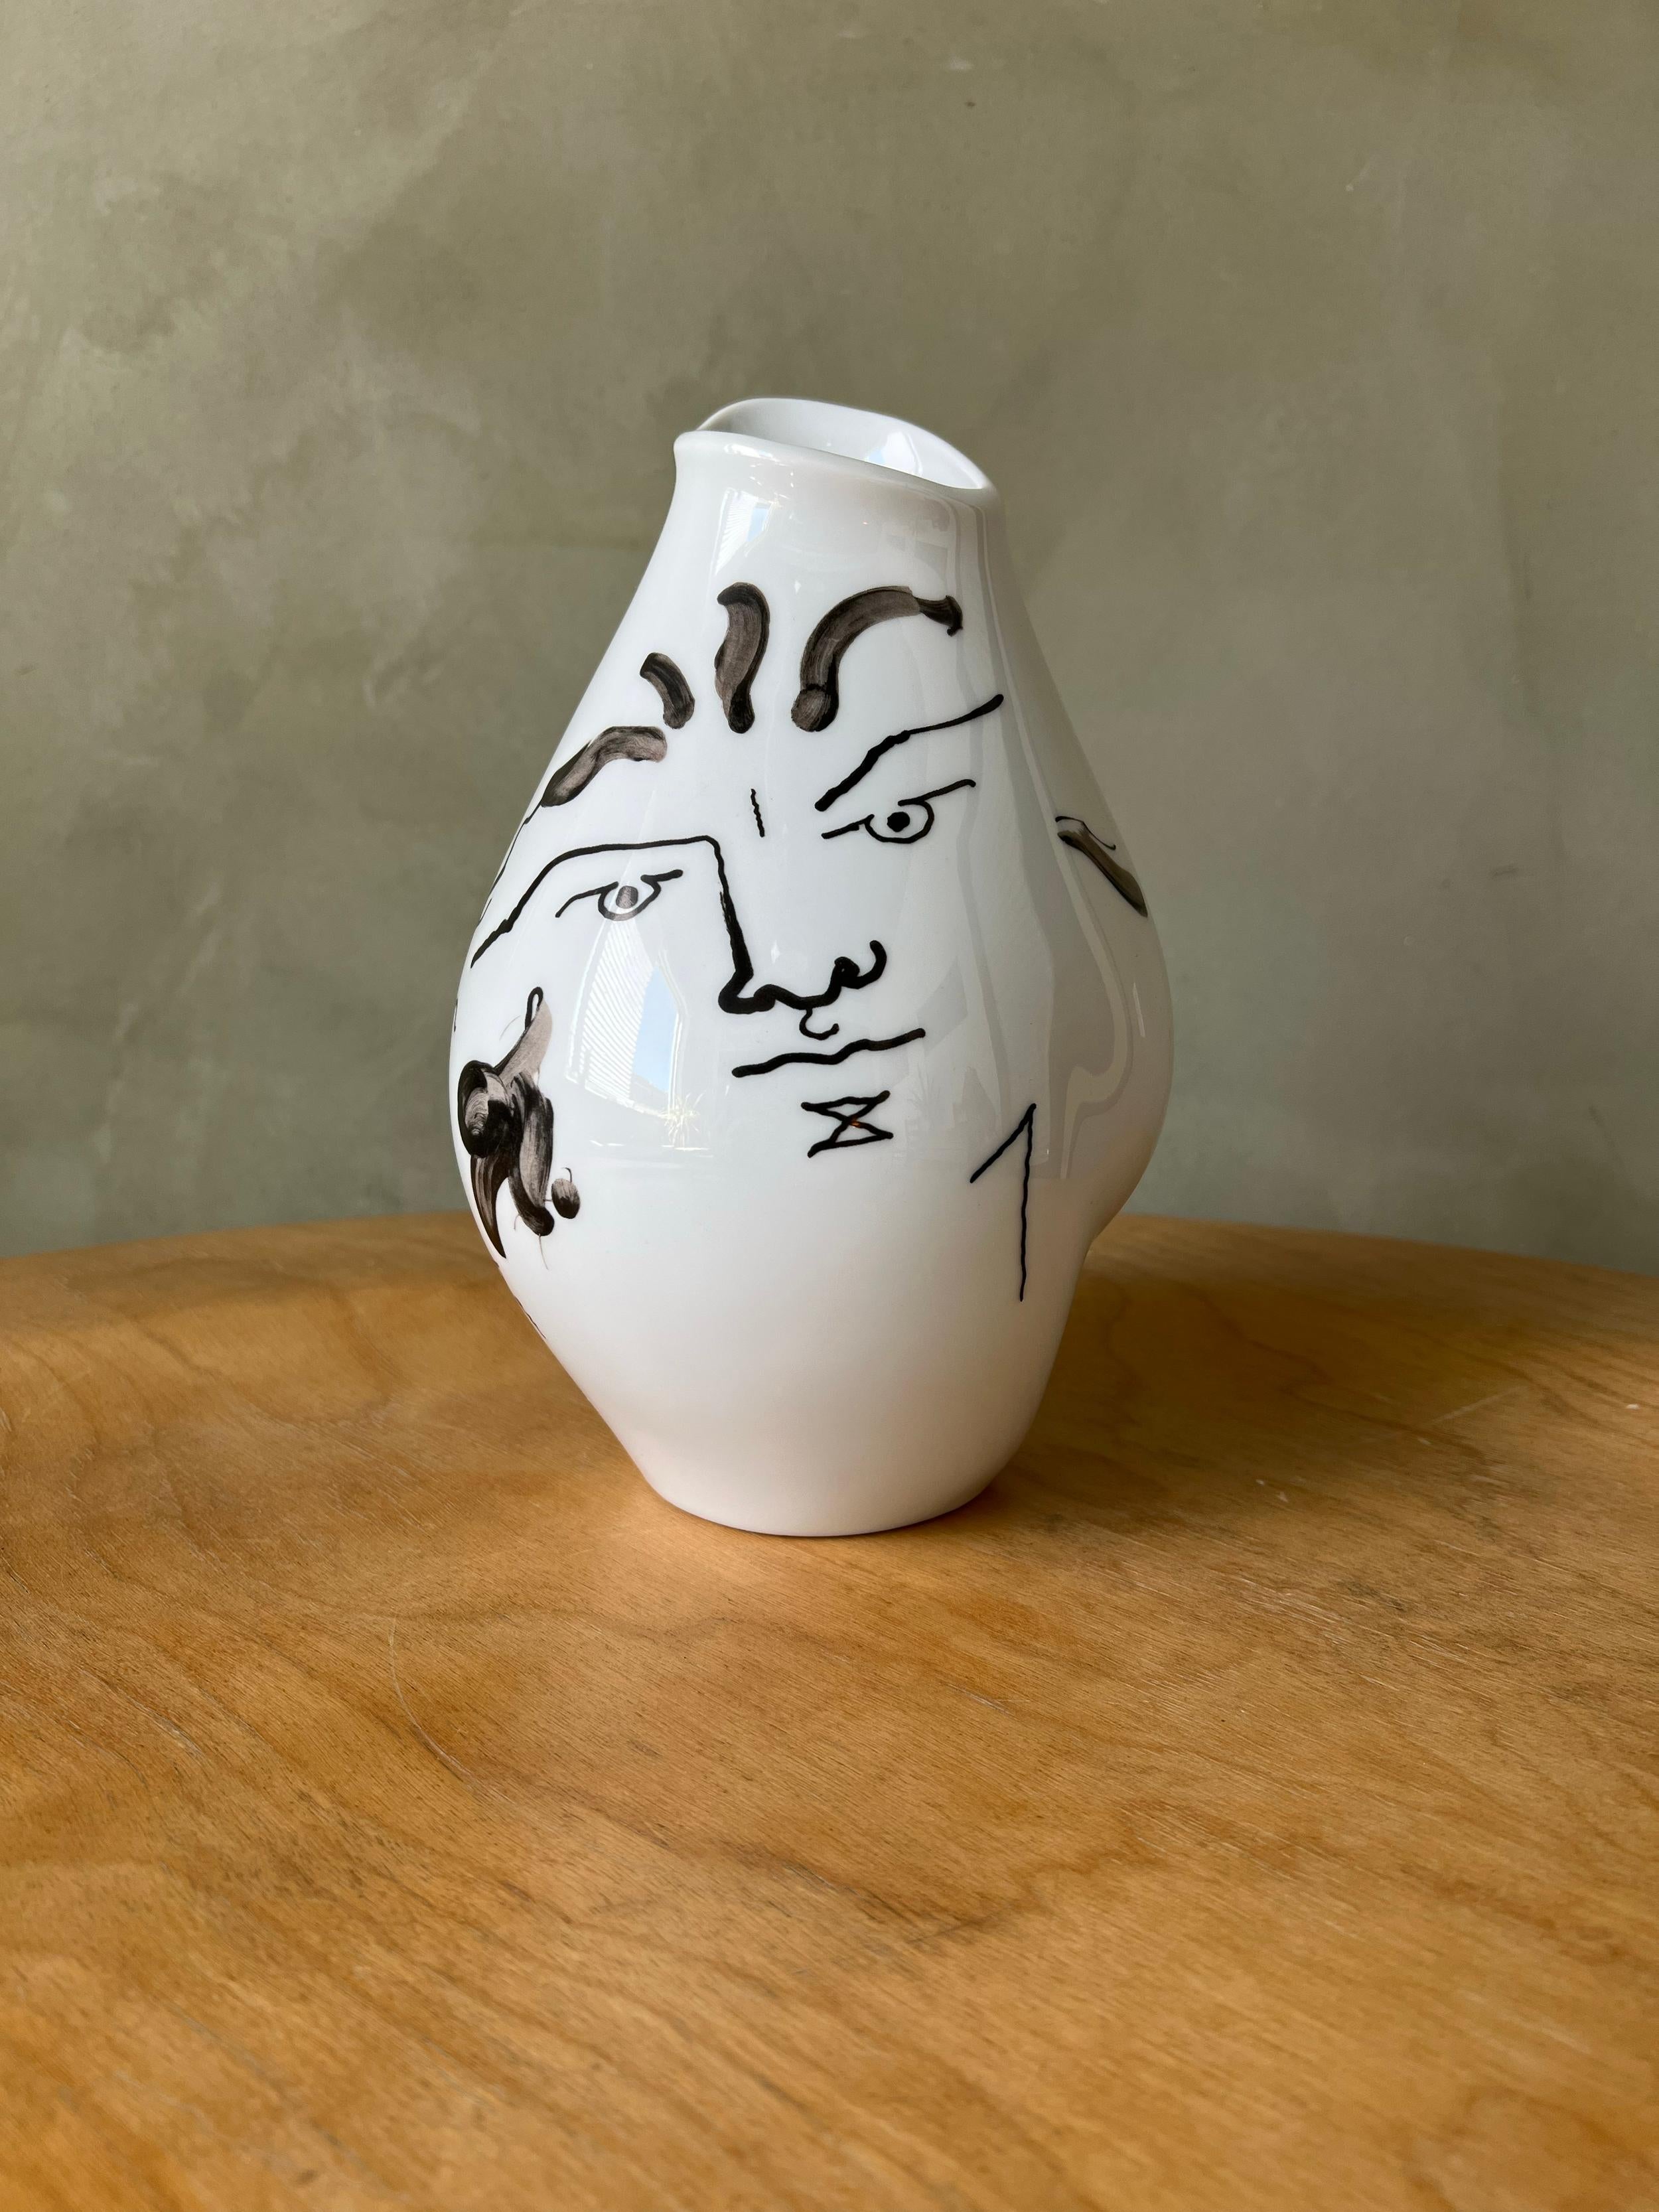 Vase designed by Jean Cocteau features two faces on opposite sides of the vase. In great condition, no chips or cracks. A beautiful example of a famous vase made by Rosenthal.